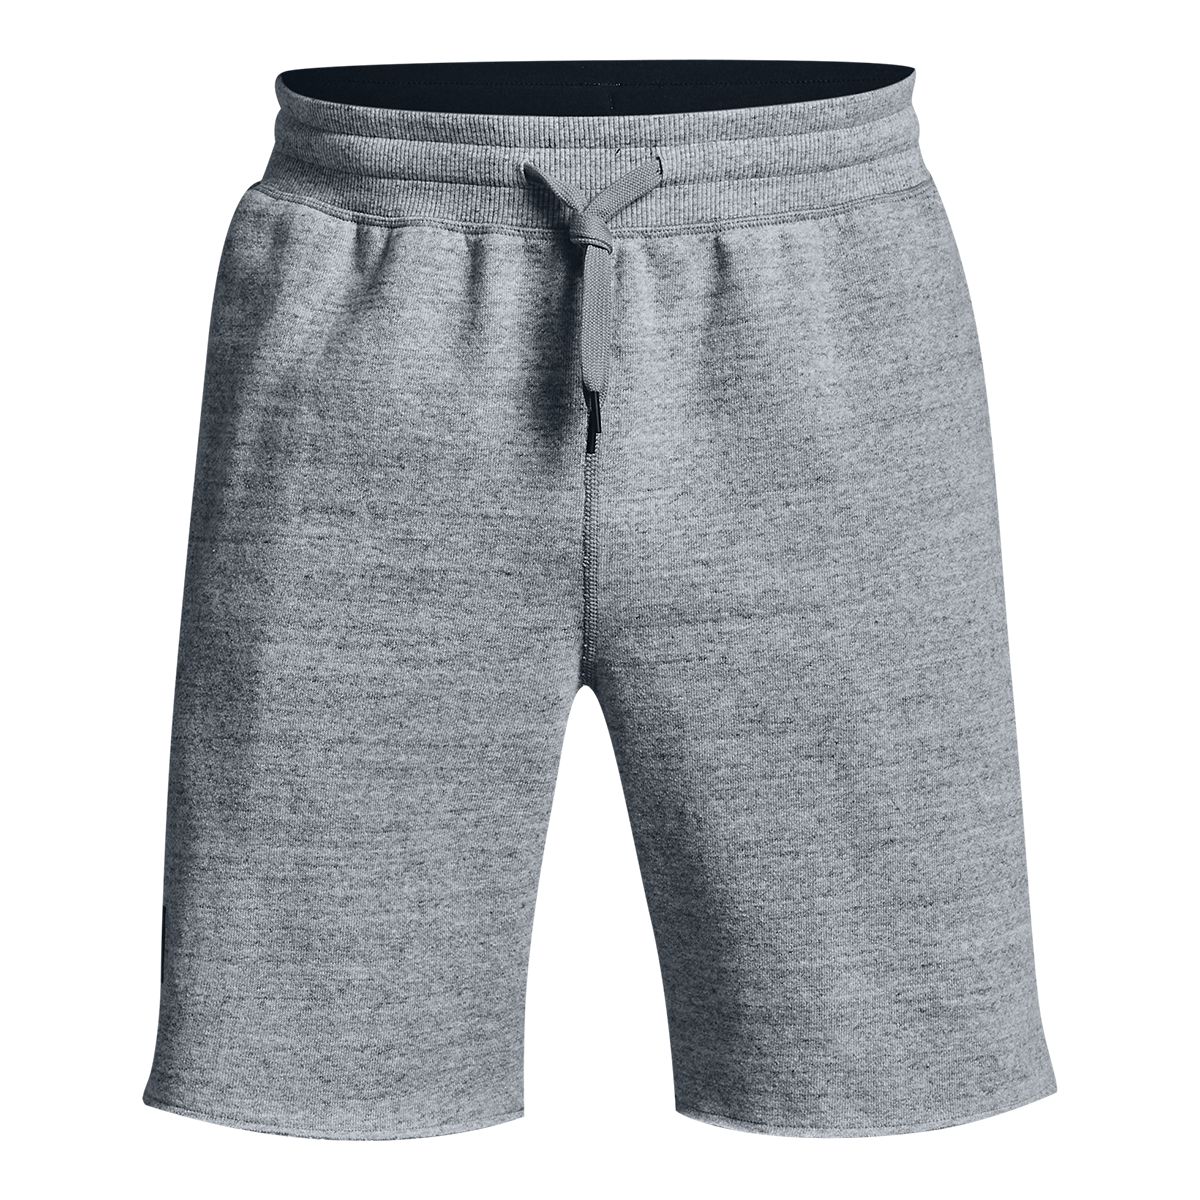 Under Armour Men's Project Rock Originators 9.5" Shorts  Loose/Relaxed Fit  Gym  Drawstring